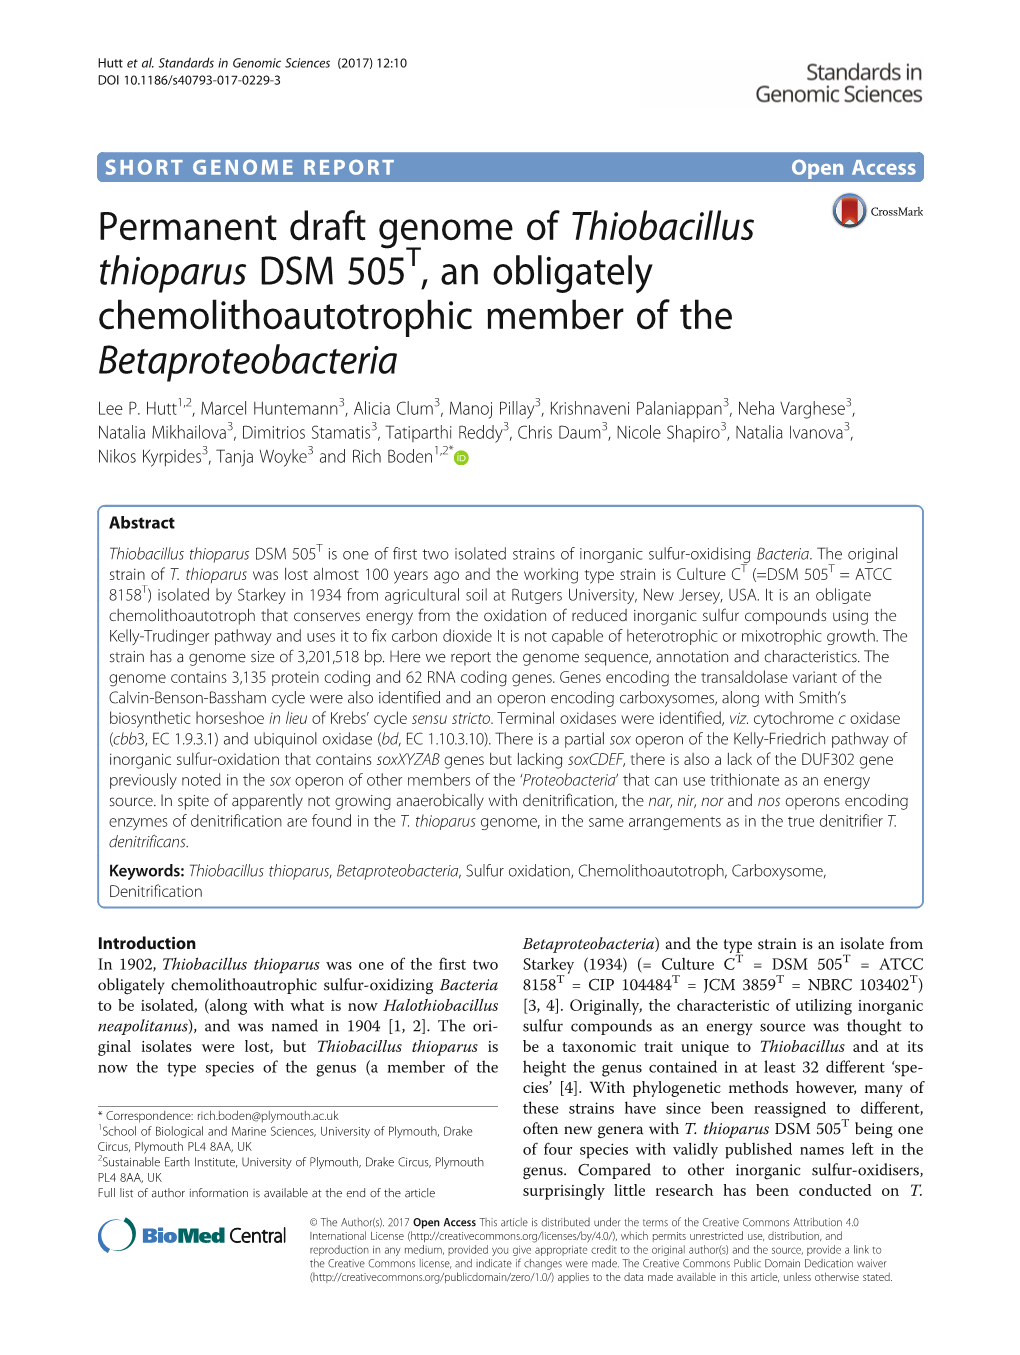 Permanent Draft Genome of Thiobacillus Thioparus DSM 505T, an Obligately Chemolithoautotrophic Member of the Betaproteobacteria